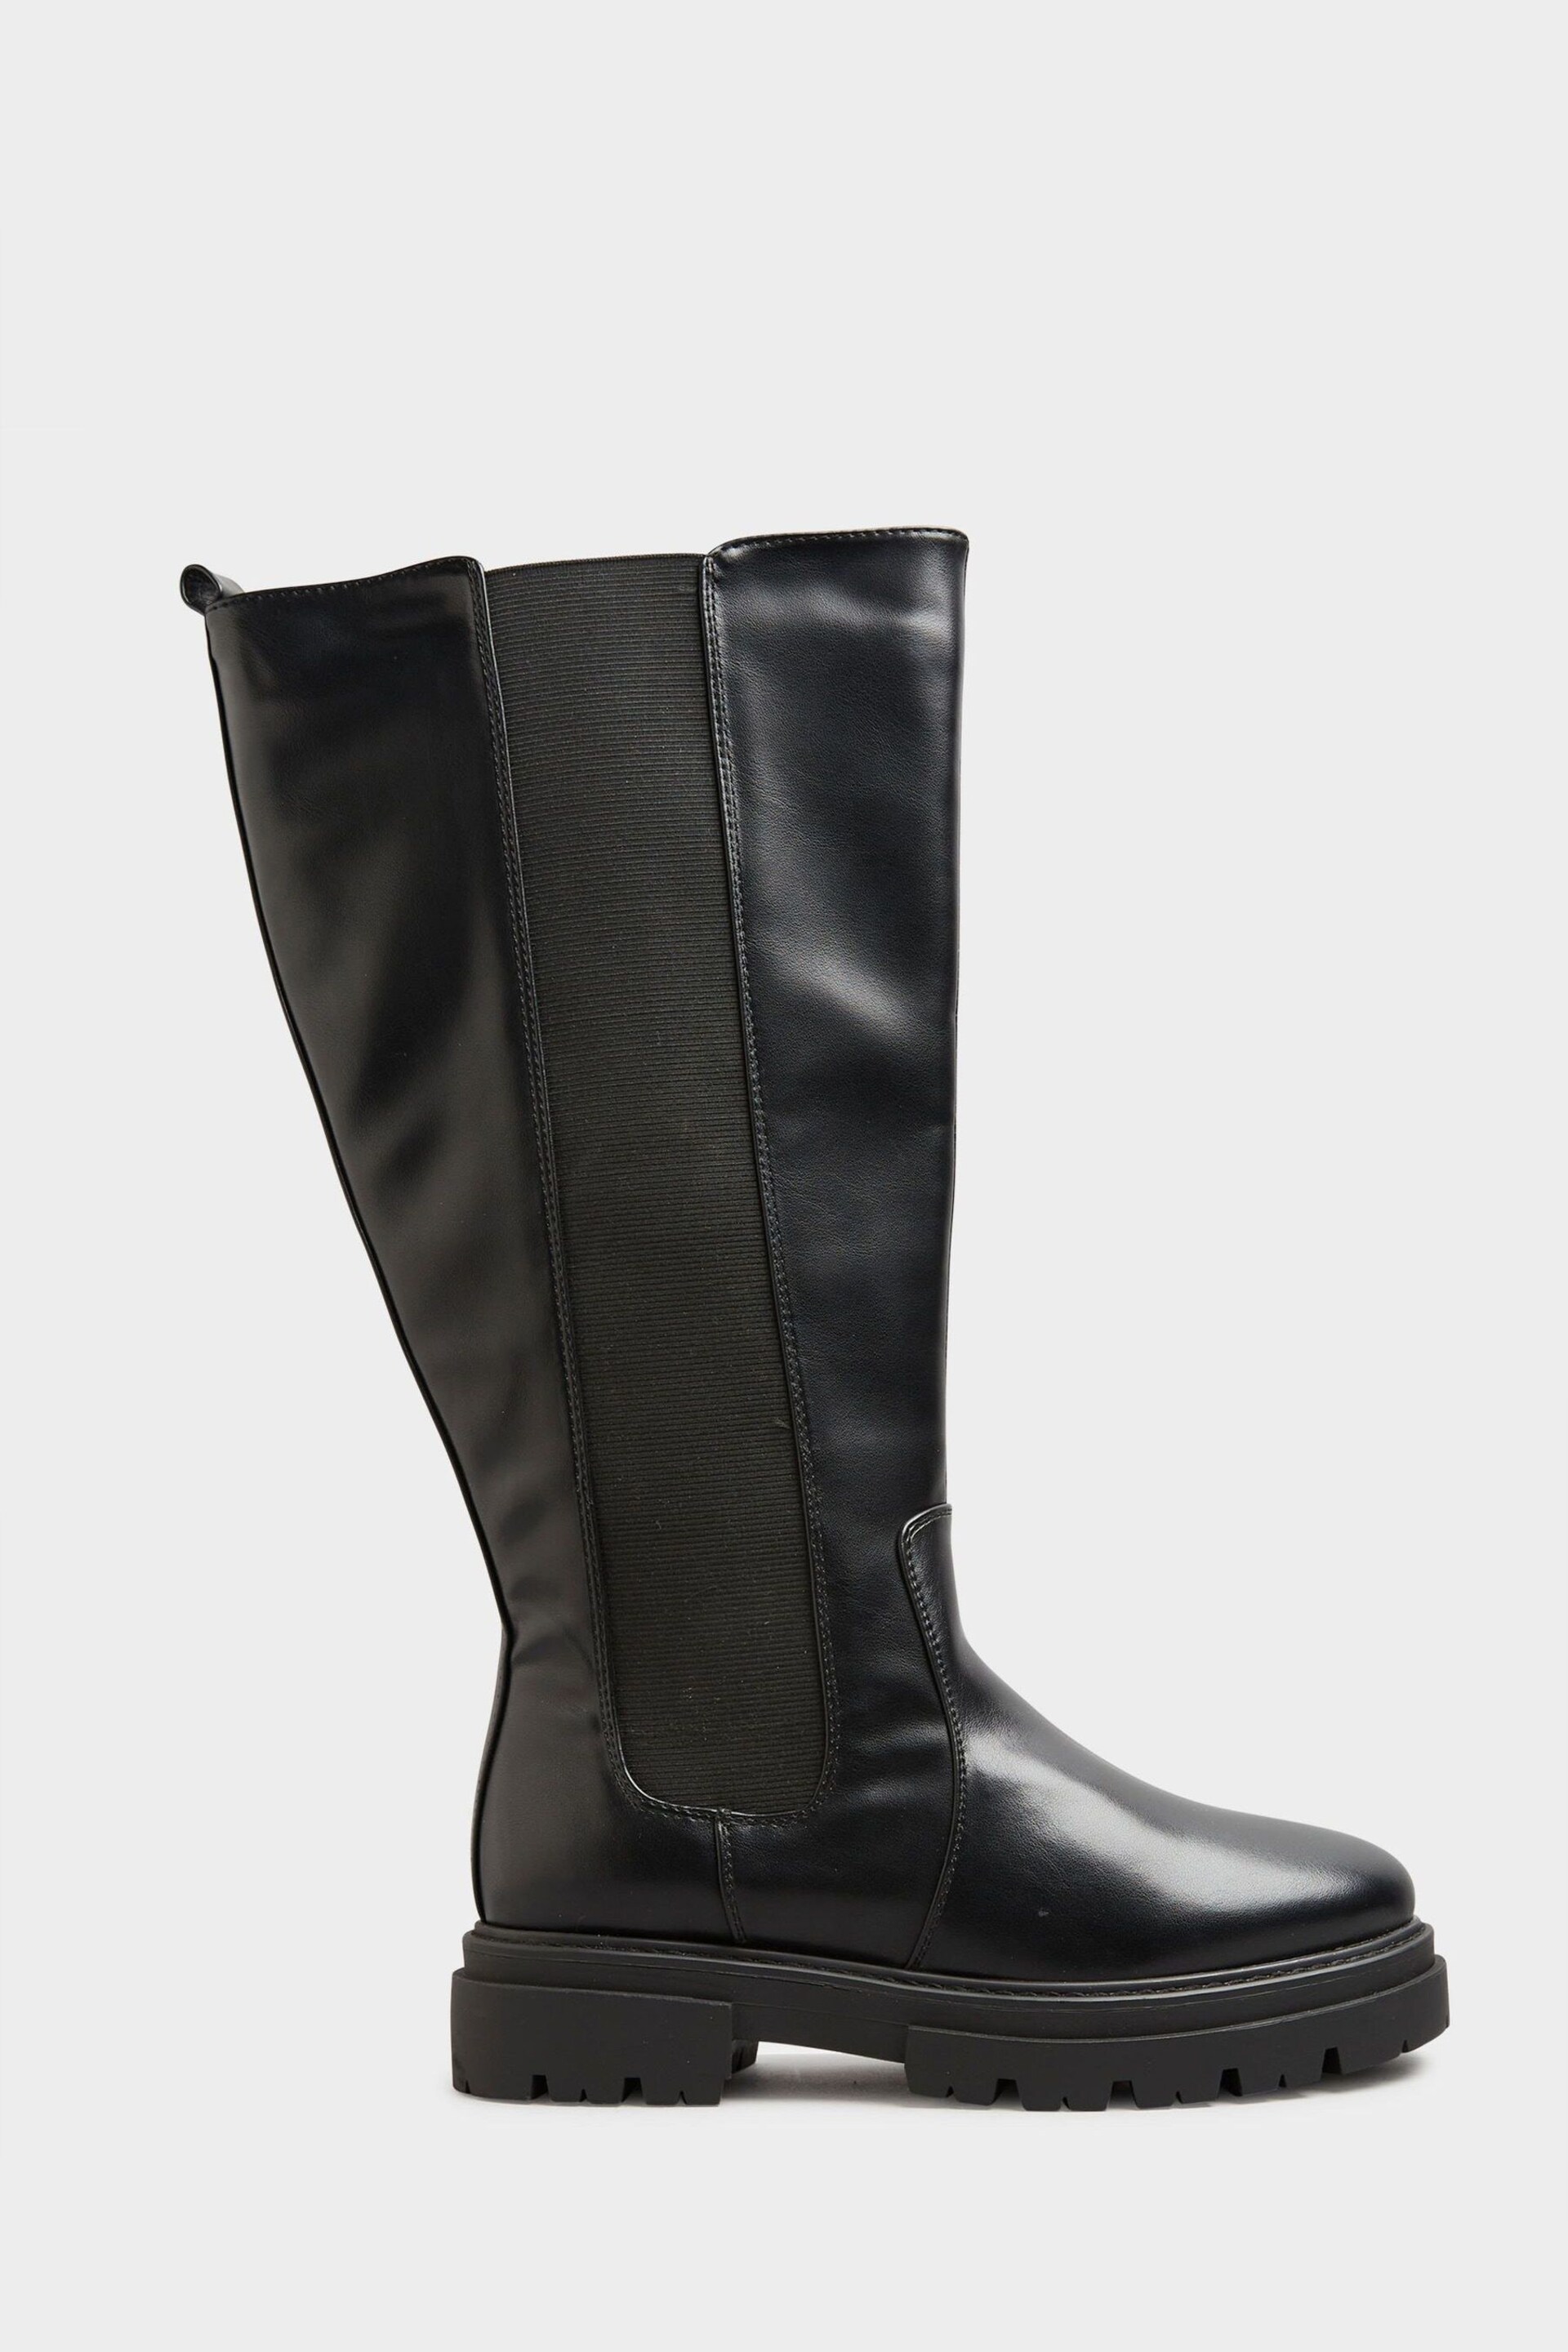 Yours Curve Black Wide Fit Elastic Knee Cleated Boots - Image 2 of 4